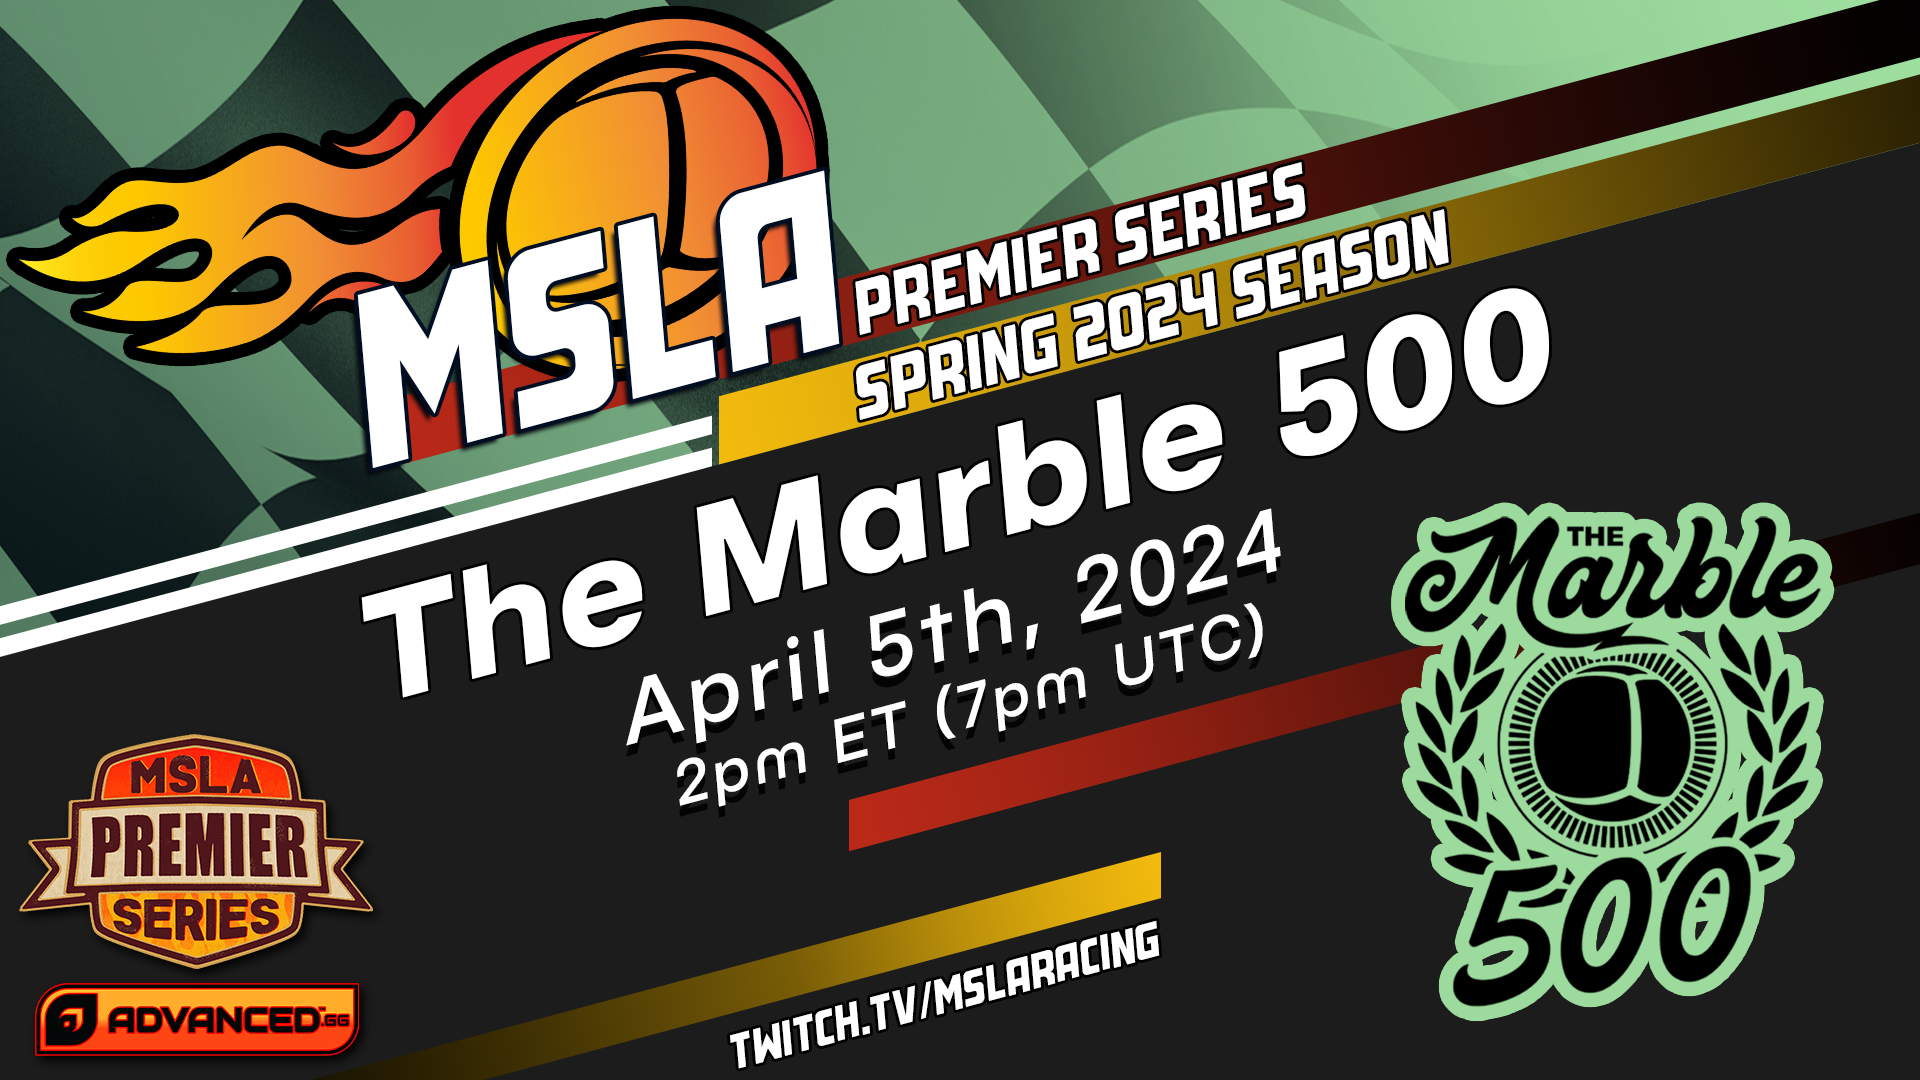 The 12th Marble 500